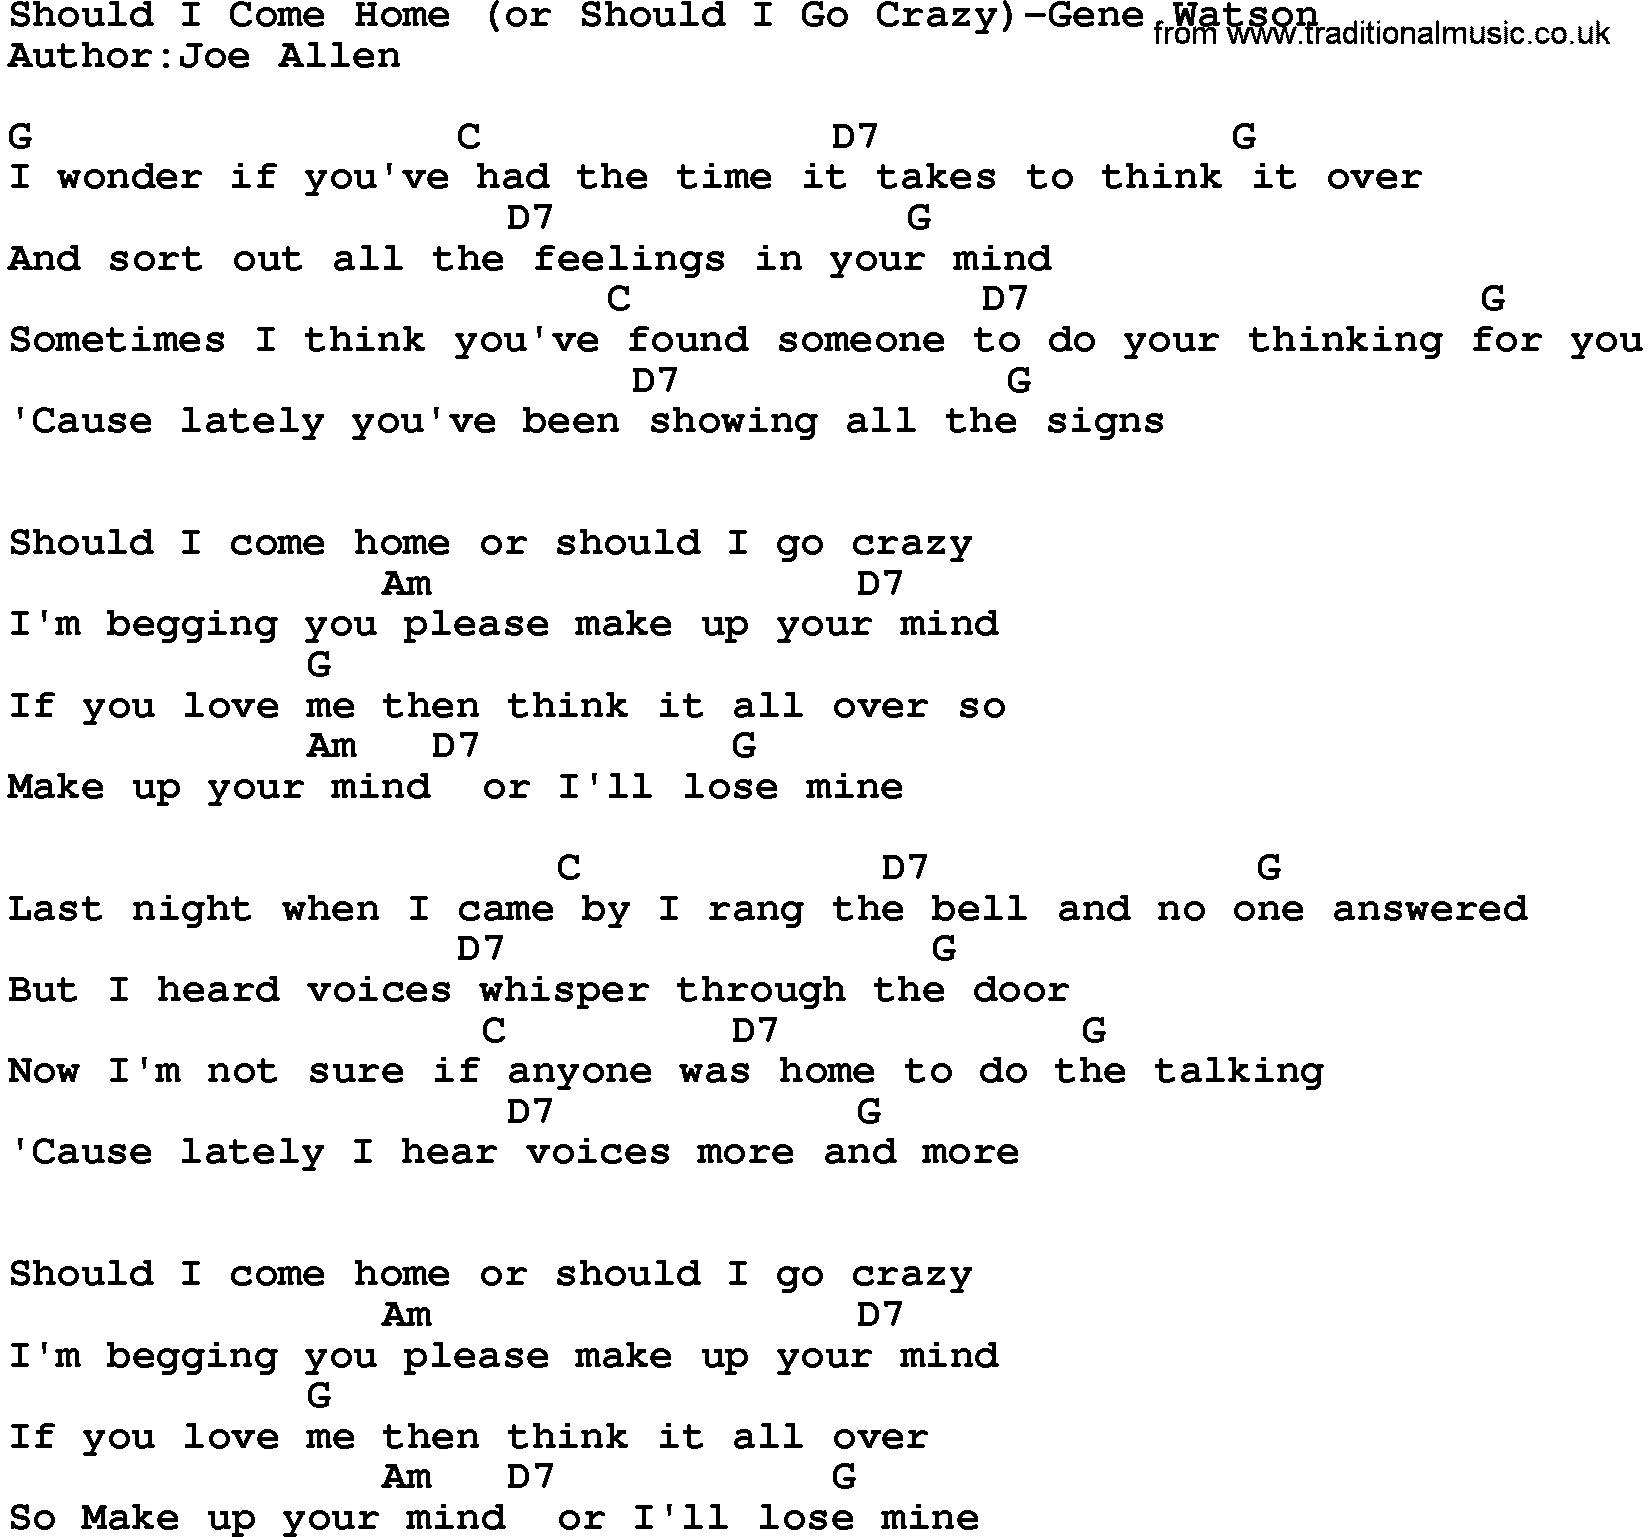 Country music song: Should I Come Home(Or Should I Go Crazy)-Gene Watson lyrics and chords